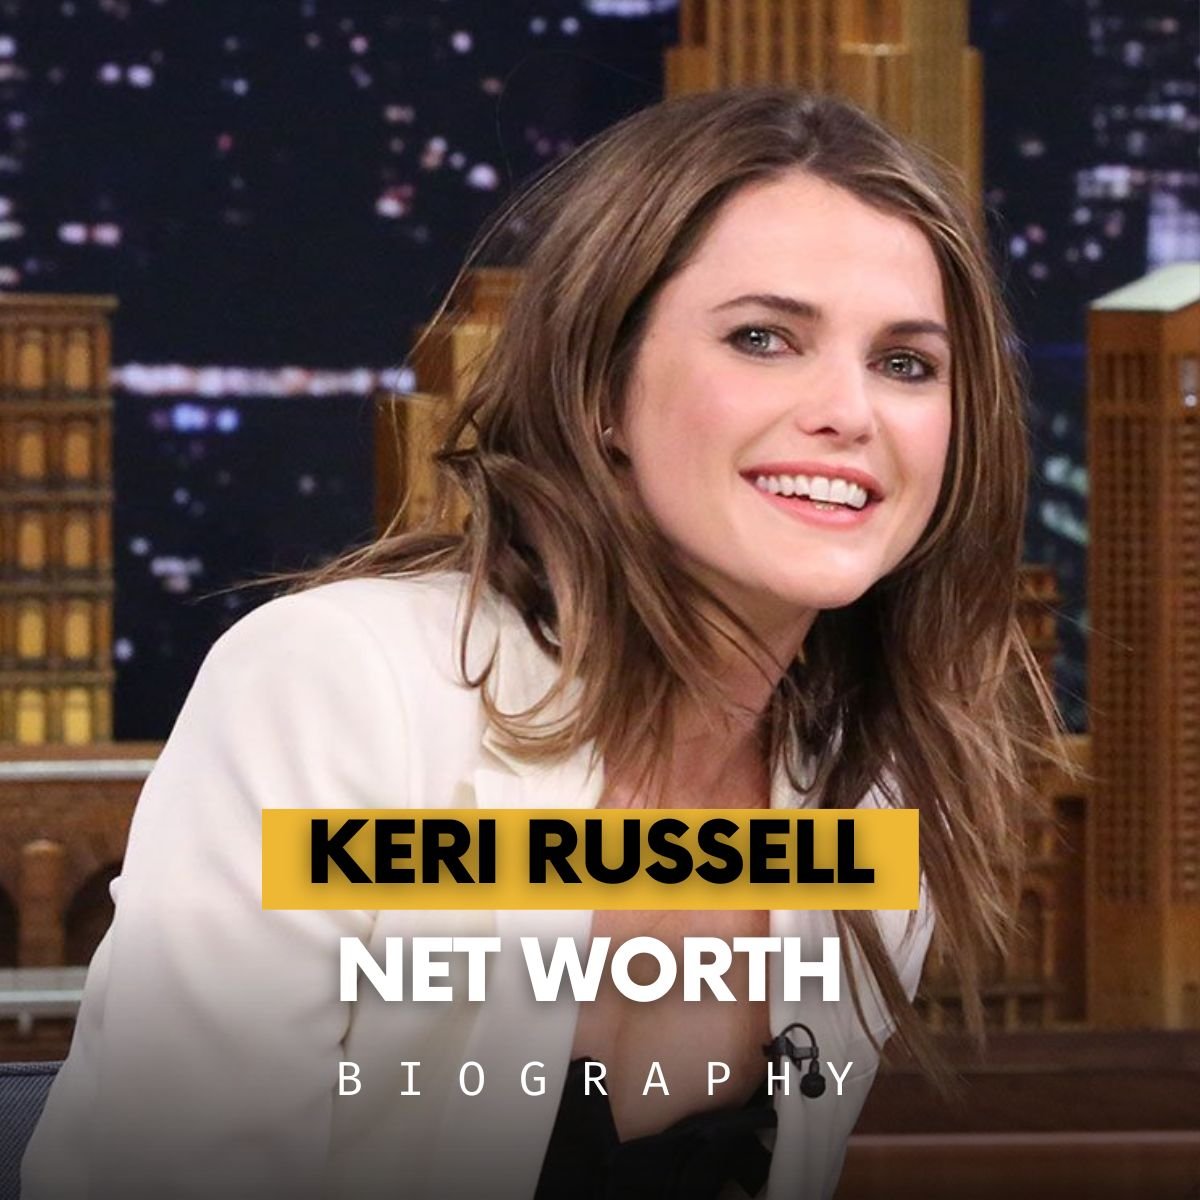 Picture of Keri Russell from an interview